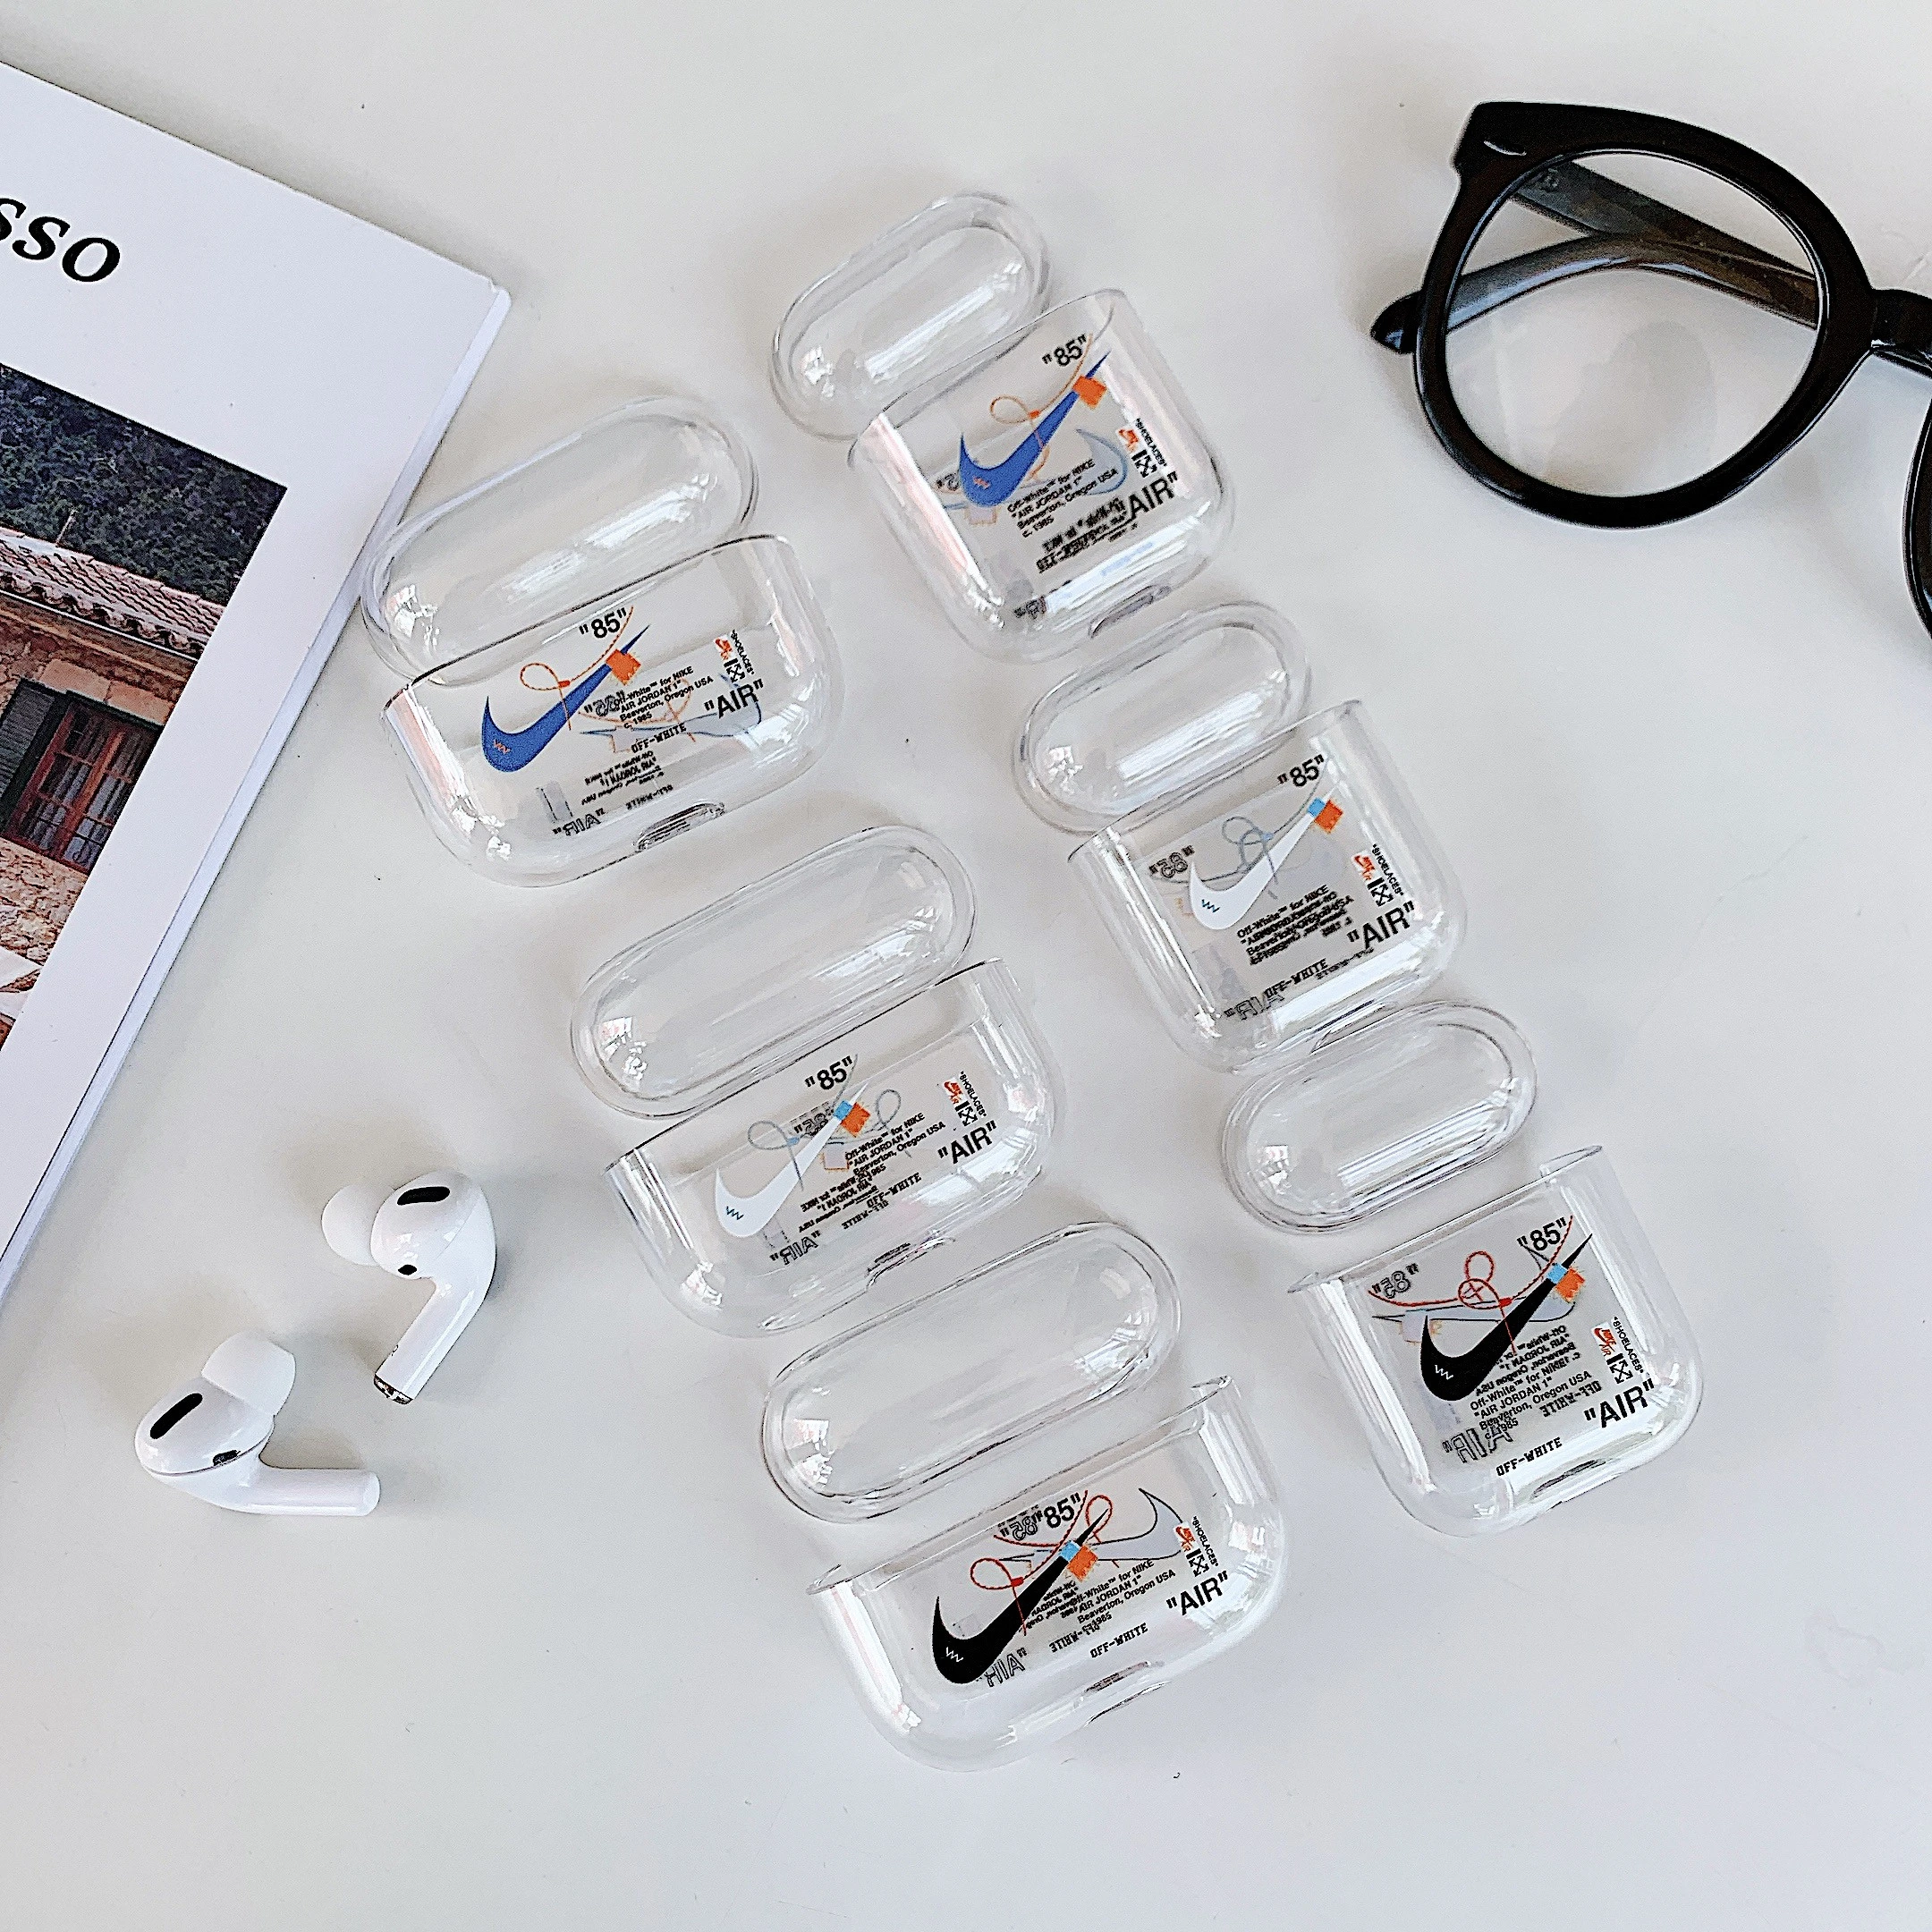 Buy Airpods 1 2 Pro Transparent White Niike Case Sport Pattern Customizable Logo For Apple Airpods 1 2 Pro from Shenzhen Technology Co., Ltd., China | Tradewheel.com